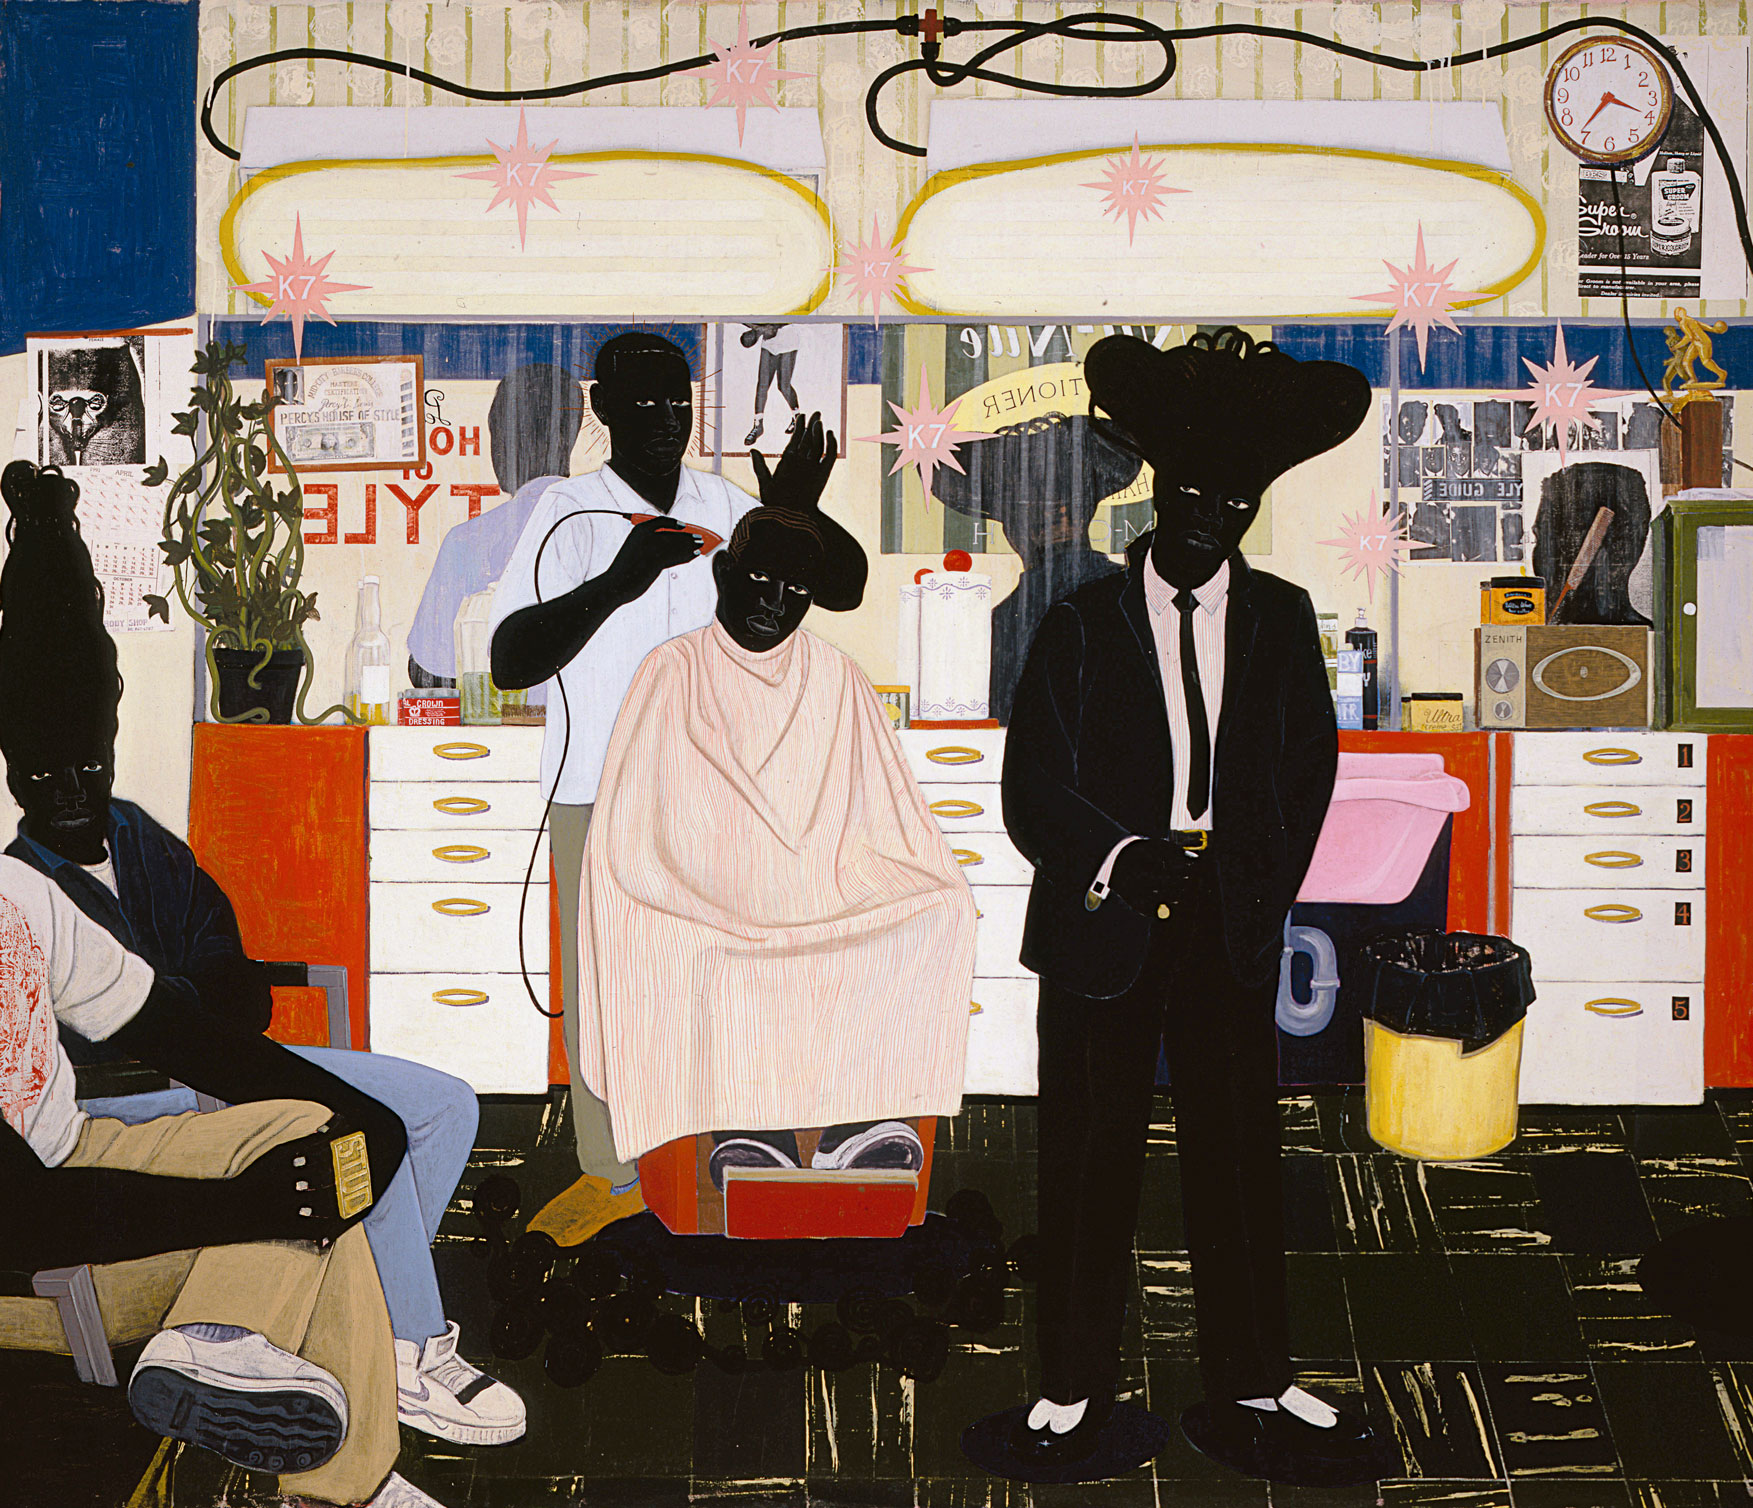 De Style, 1993, acrylic and collage on canvas, 264 x 310 cm. Picture credit: